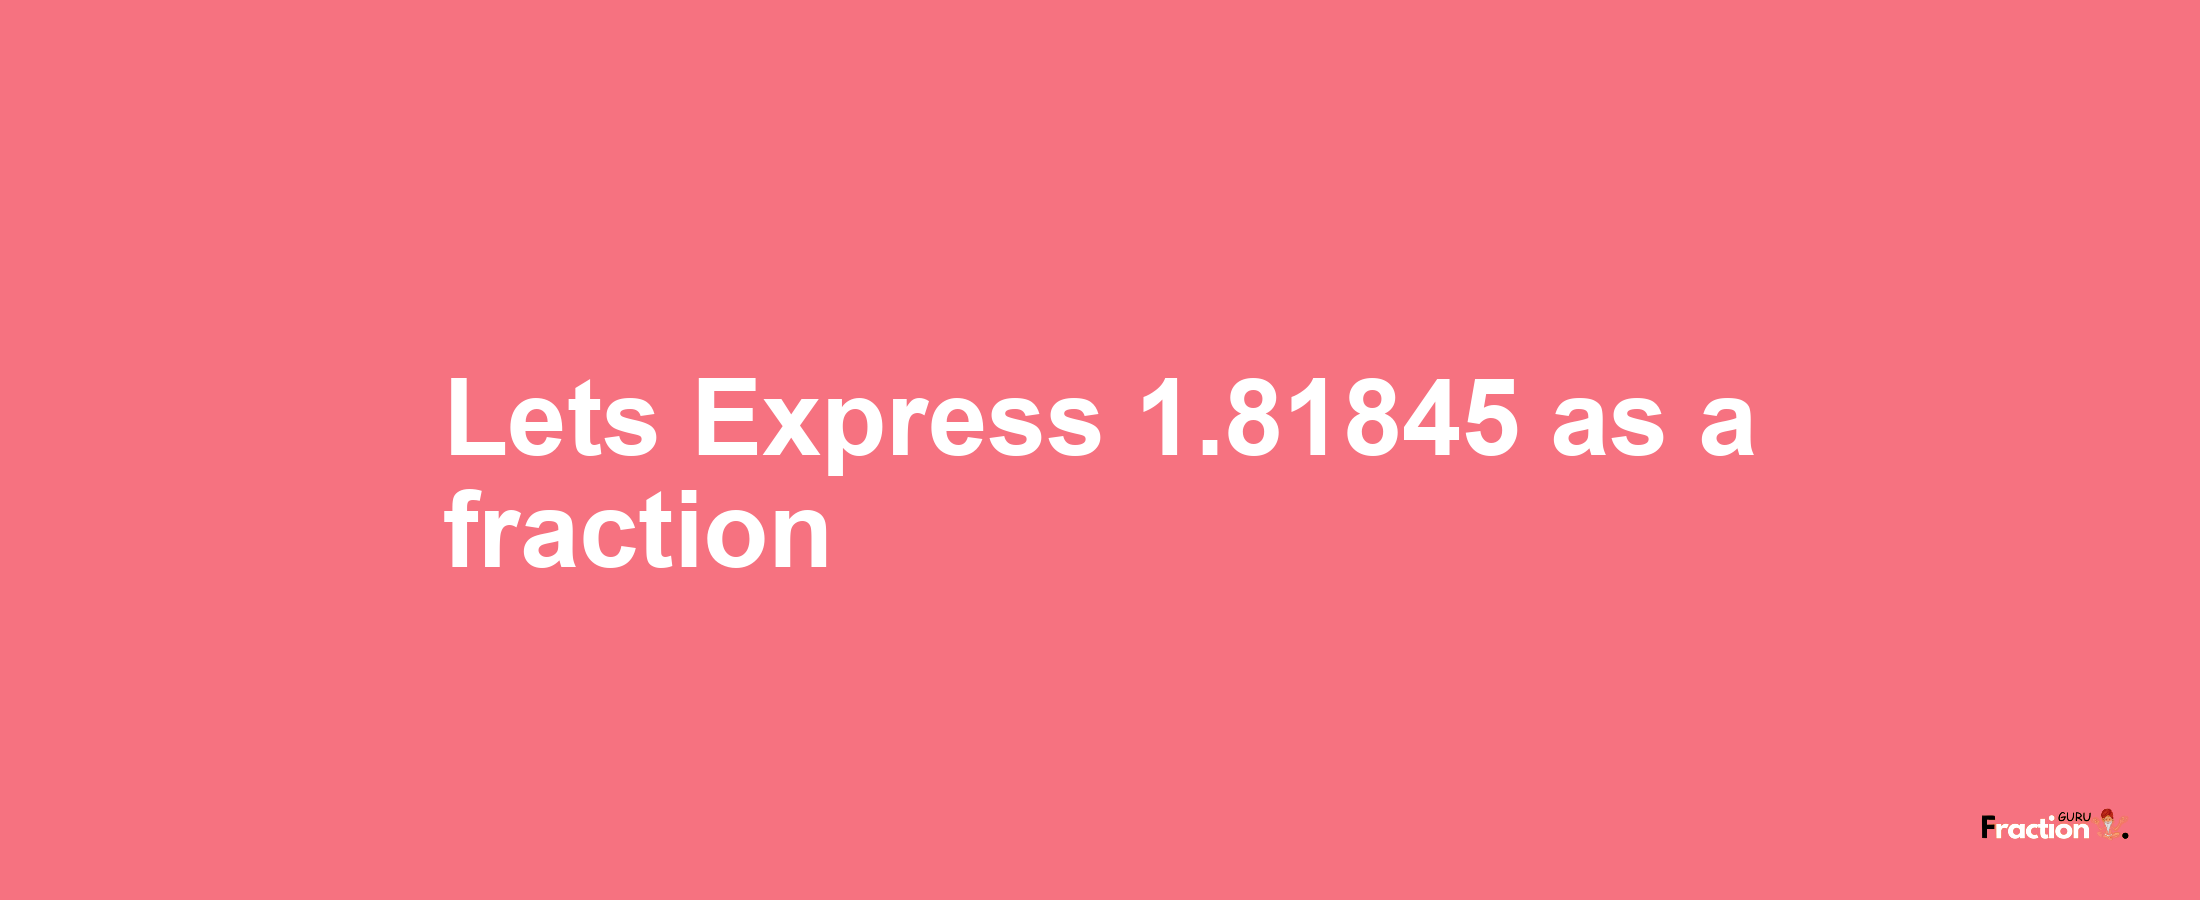 Lets Express 1.81845 as afraction